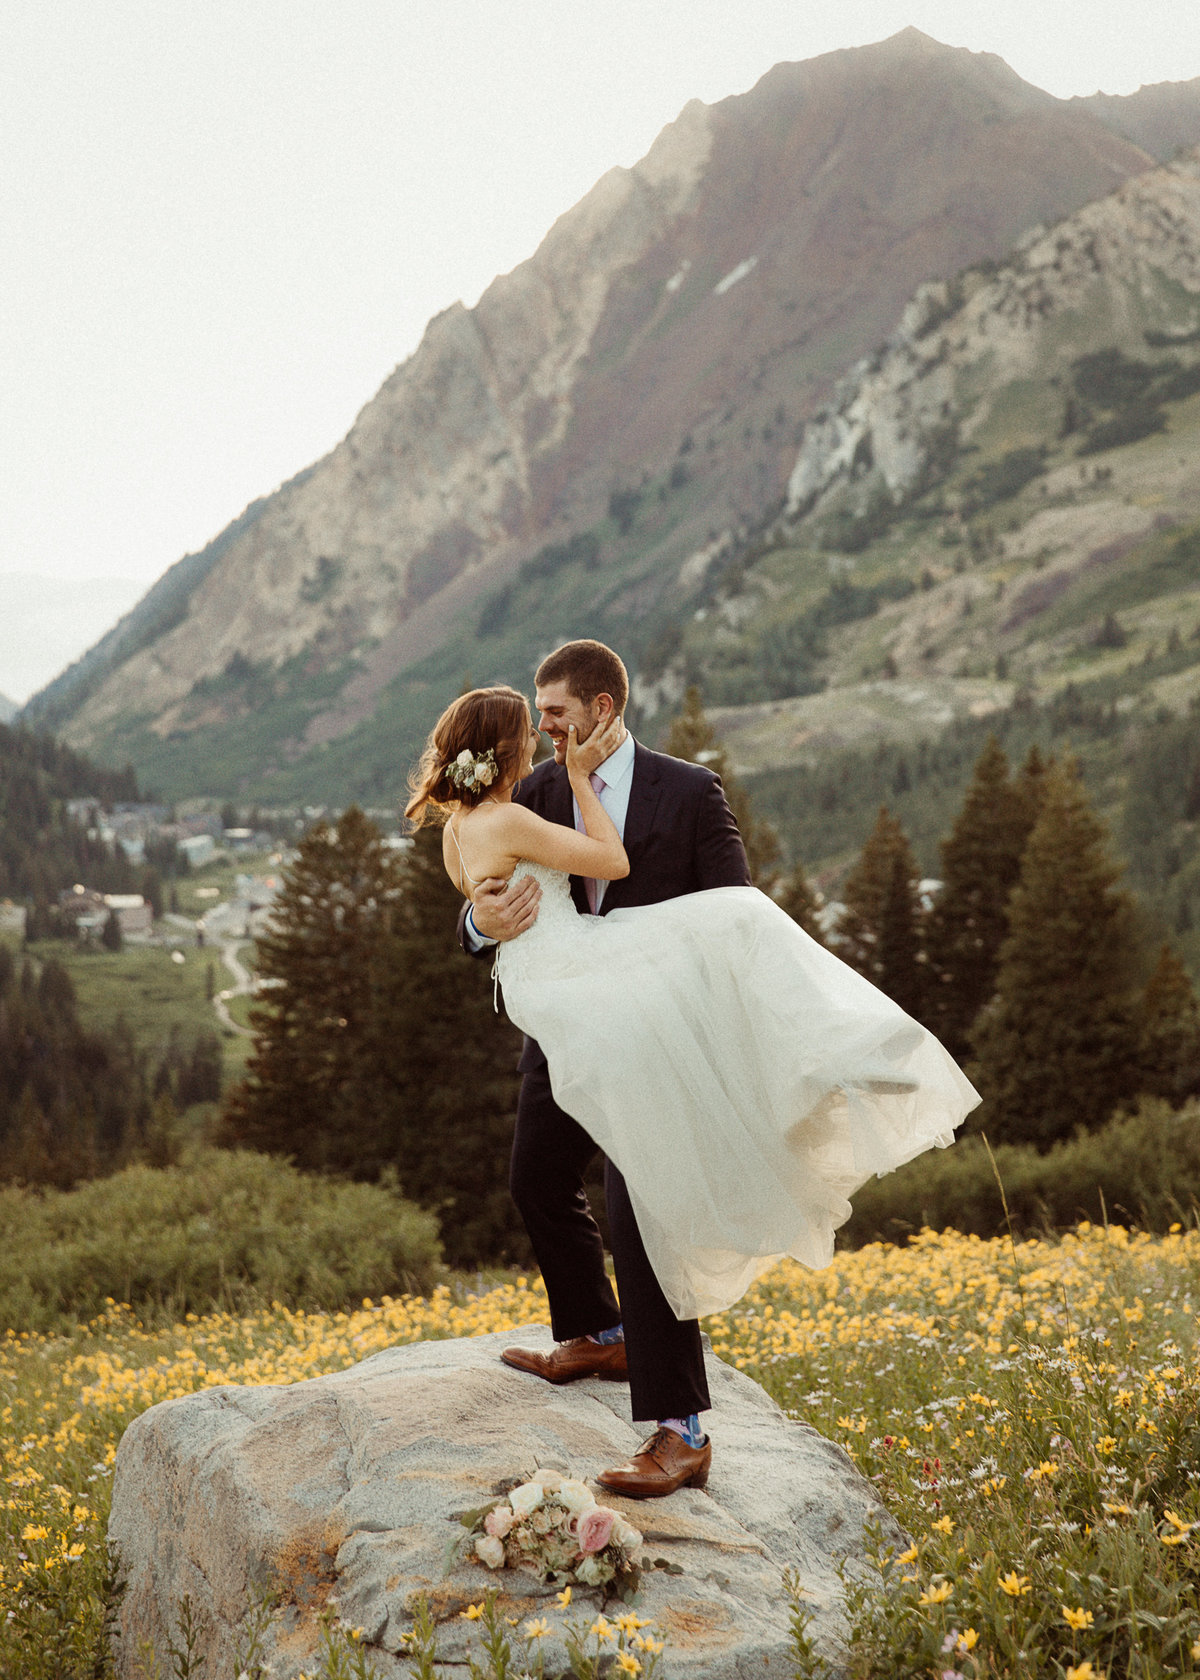 groom picks up bride while standing on a rock, surrounded by yellow flowers and Alta Mountains in the background